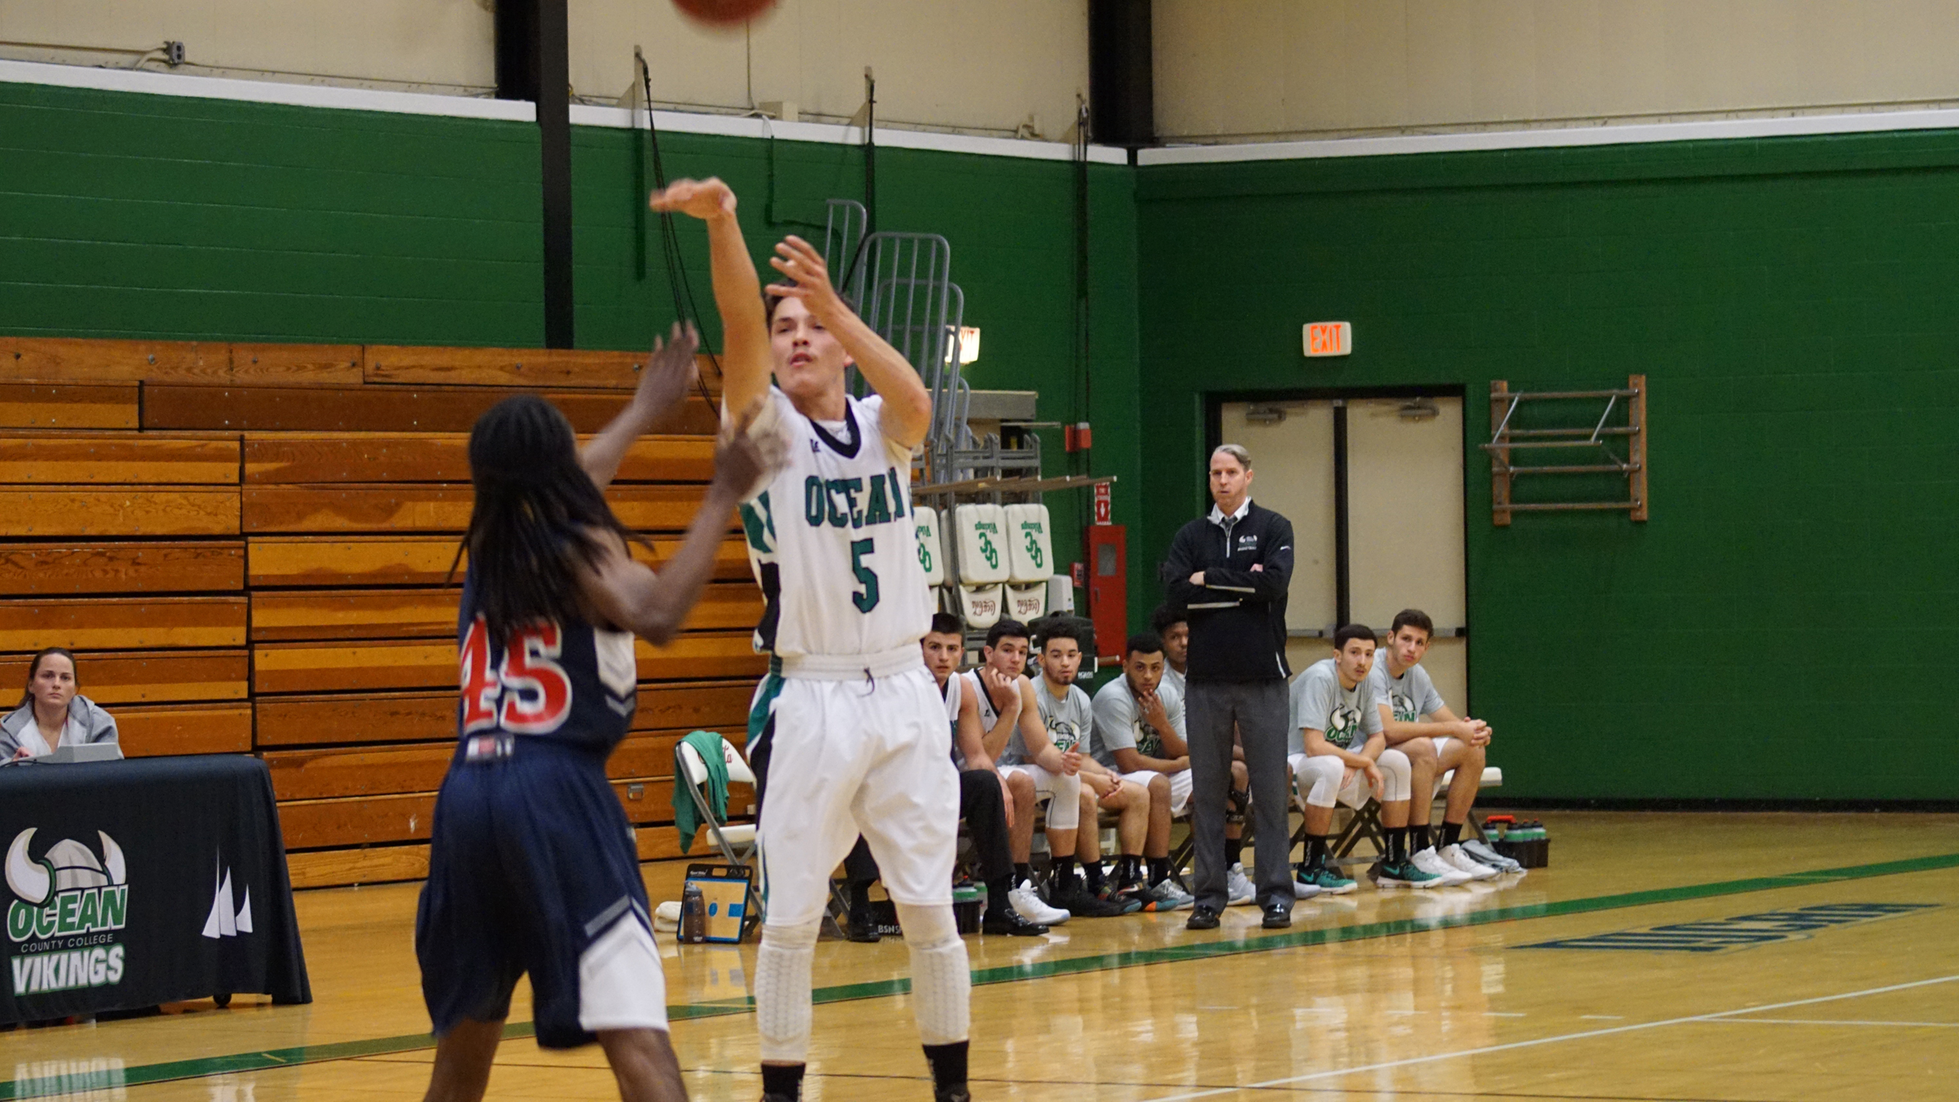 Vikings Top Sussex in Convincing Fashion, 90-59